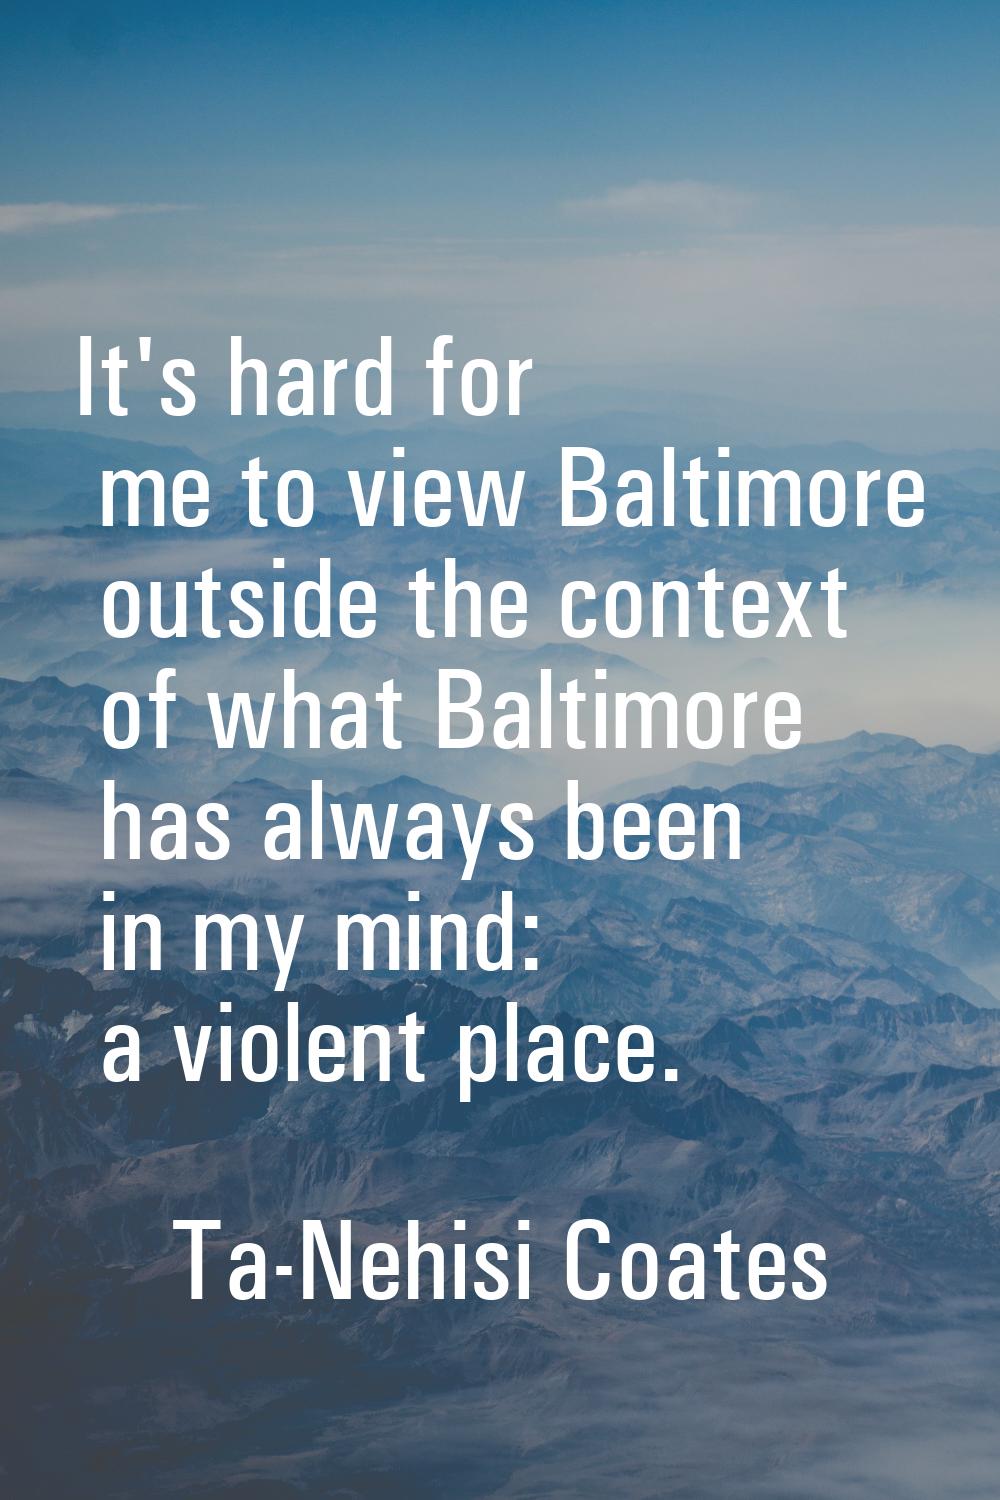 It's hard for me to view Baltimore outside the context of what Baltimore has always been in my mind